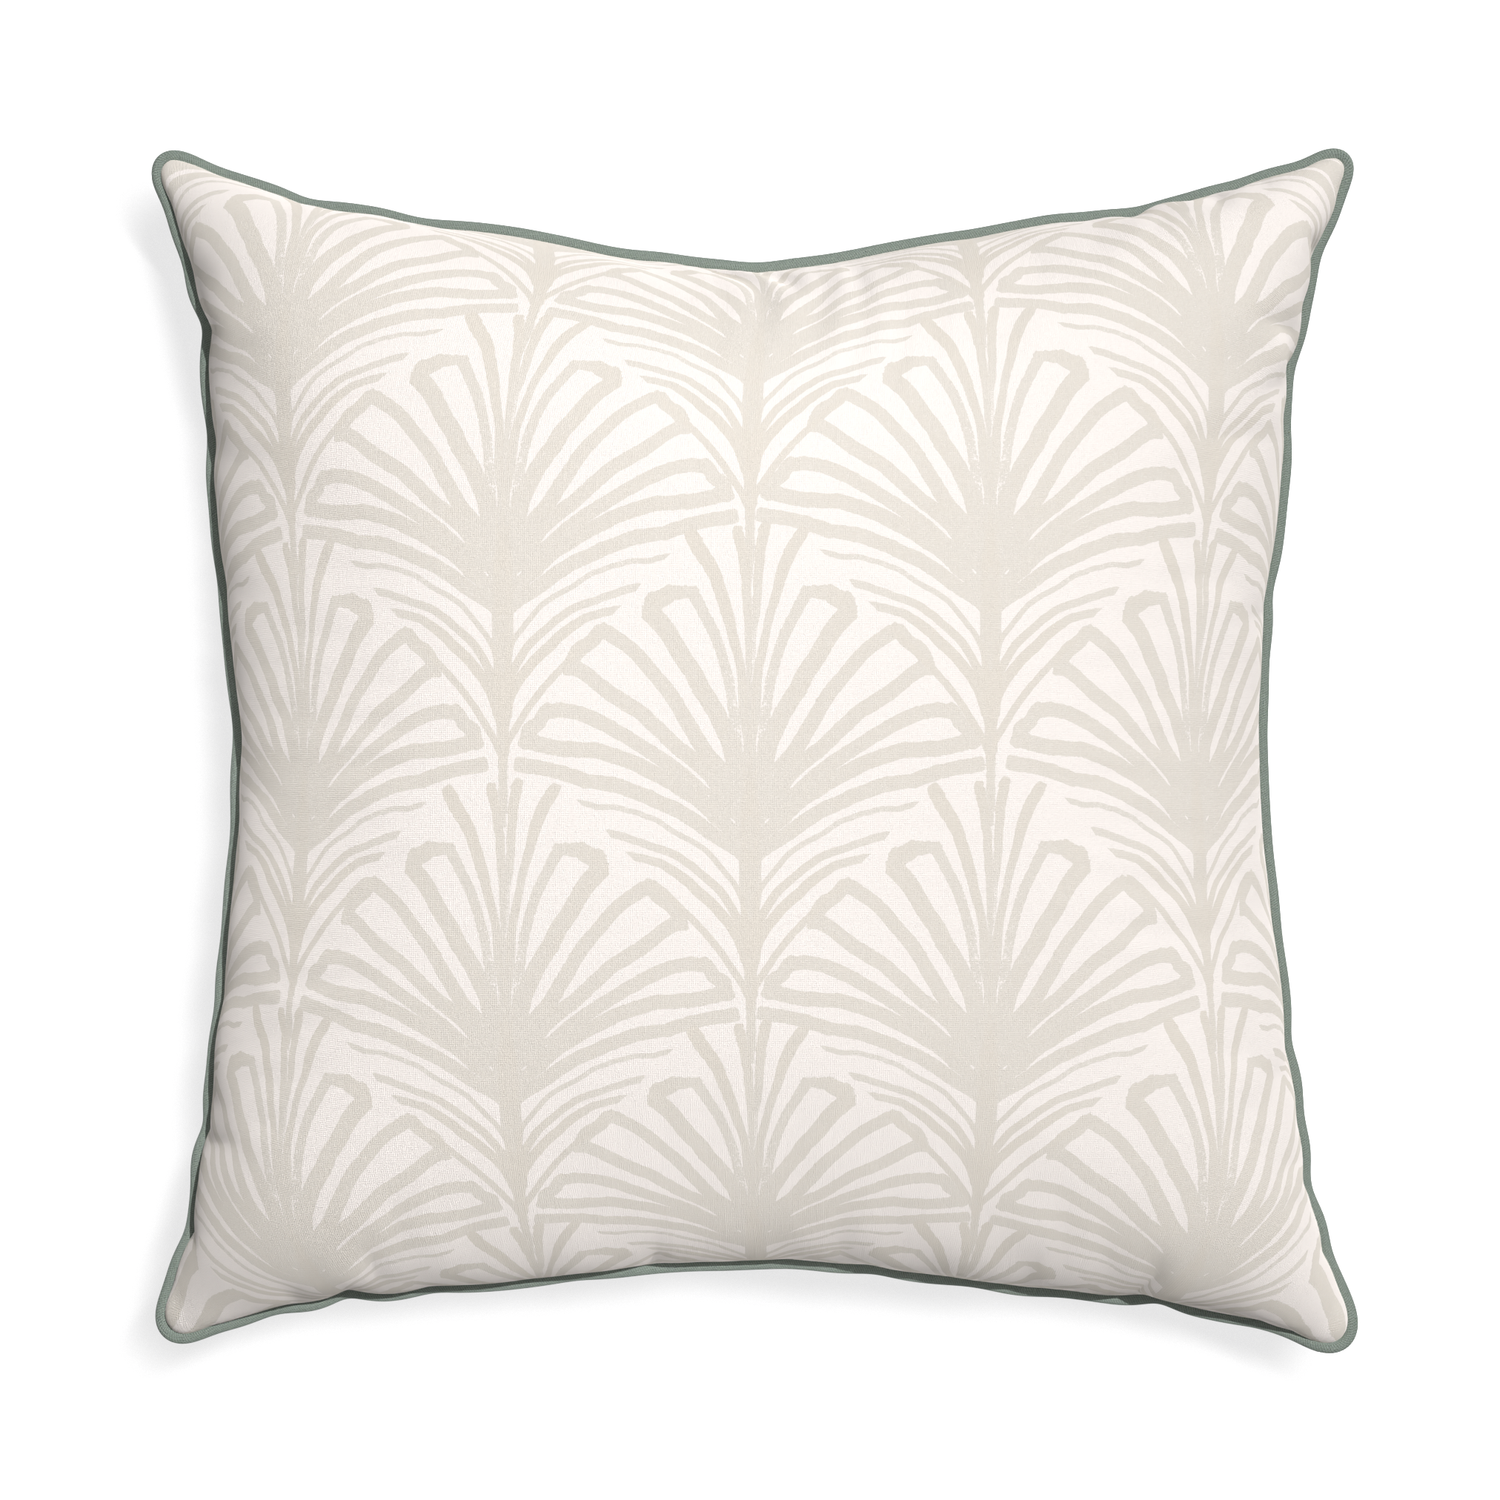 Euro-sham suzy sand custom beige palmpillow with sage piping on white background